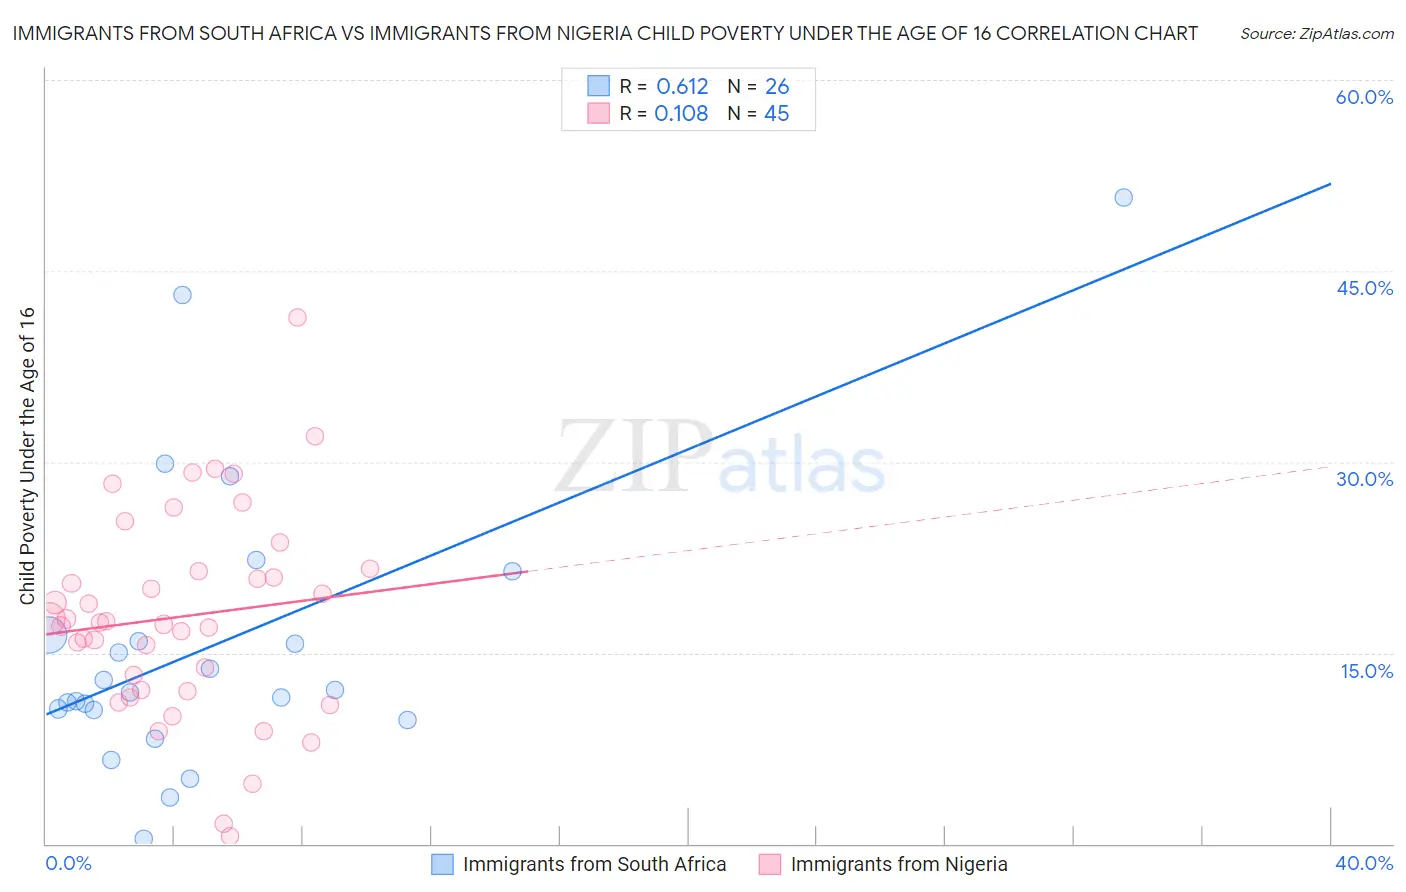 Immigrants from South Africa vs Immigrants from Nigeria Child Poverty Under the Age of 16